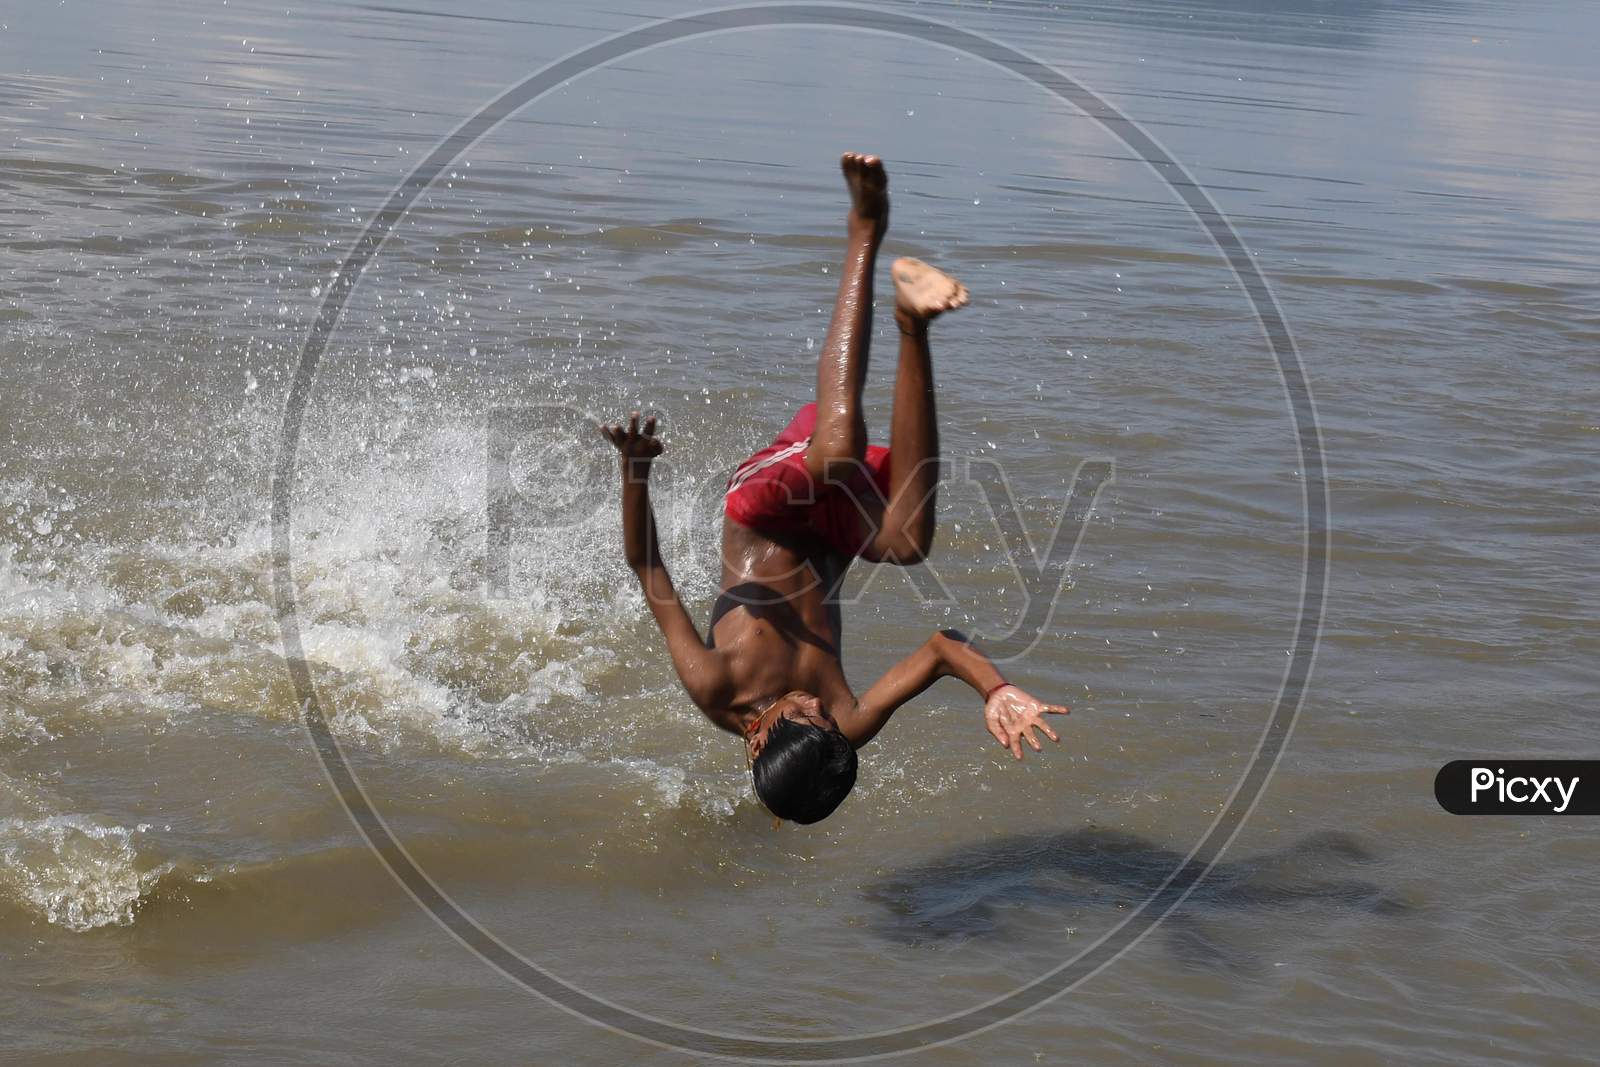 A boy jumps in the Brahmaputra river during a hot day in Guwahati, India on Oct 18, 2020